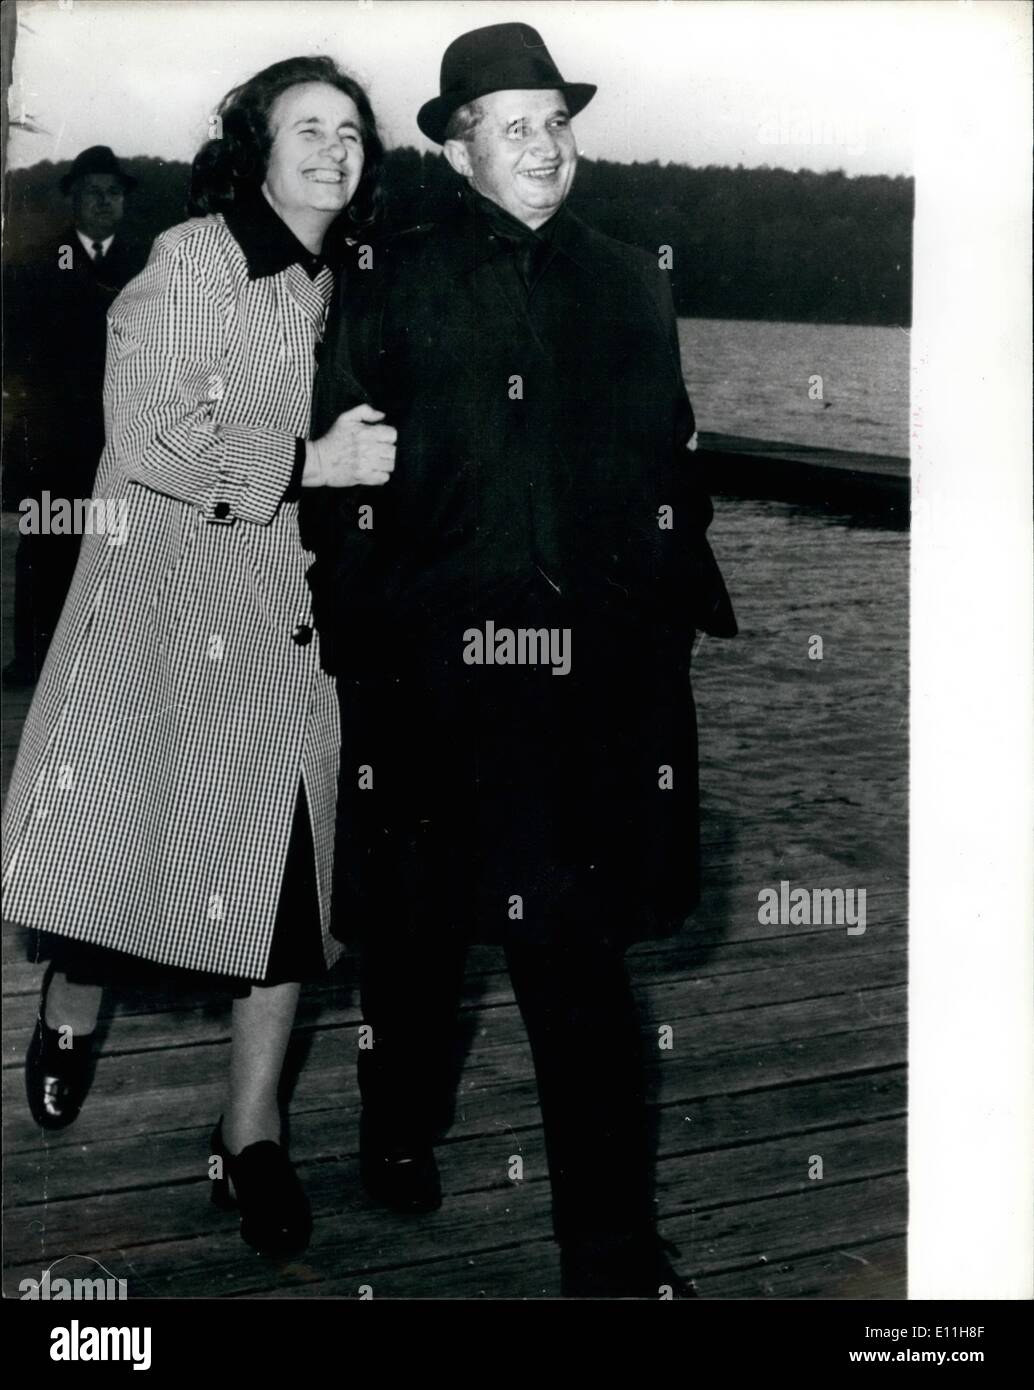 Jan. 01, 1978 - Romania President 60th Birthday: Nicholas Ceausescn, President Of Romania, And General Secretary On The Romanian Communist Party, Will Be 60 Tomorrow 26 January, Is Seen With His Wife Elena At Snagow Park, Bucharest. Stock Photo